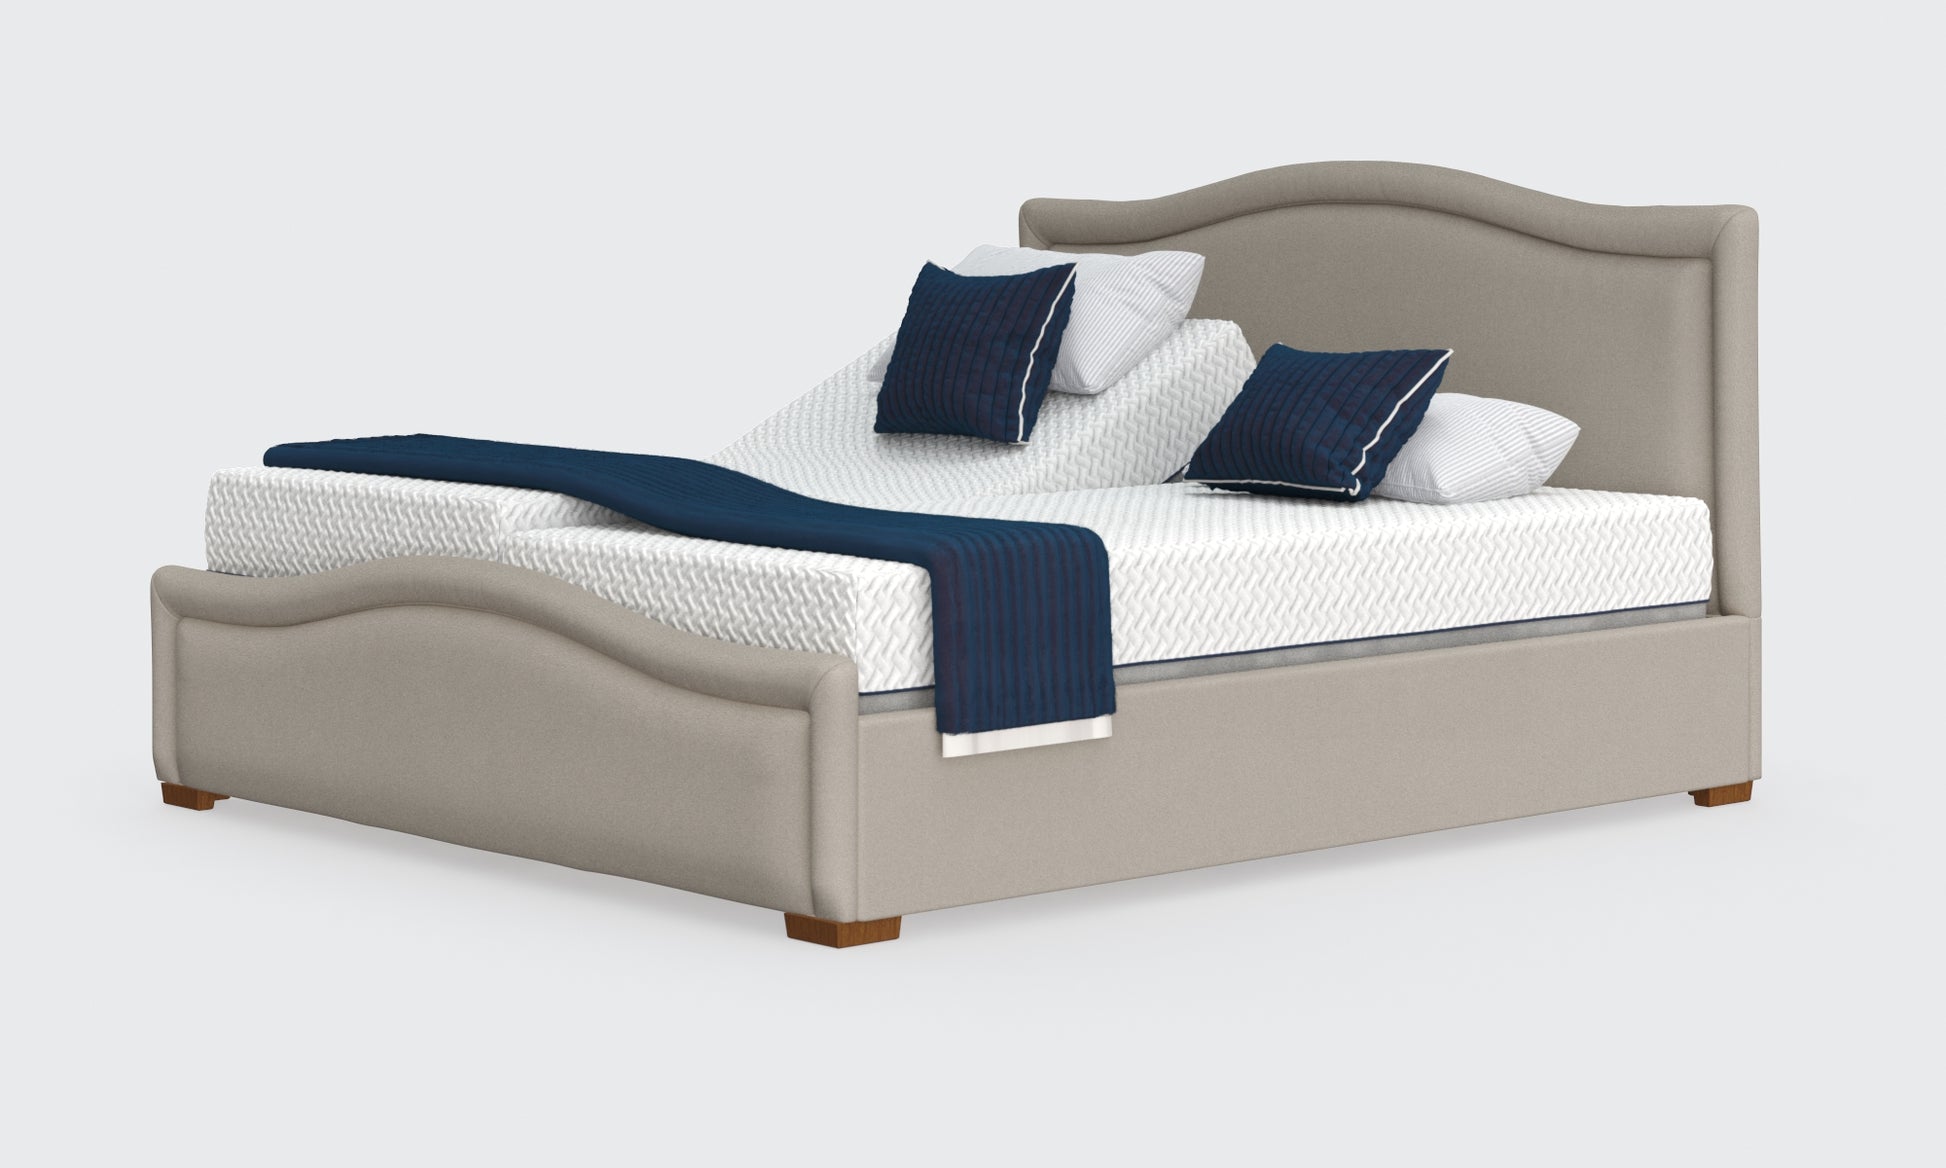 Edel 6ft bed and mattress in the linen material with the pearl headboard